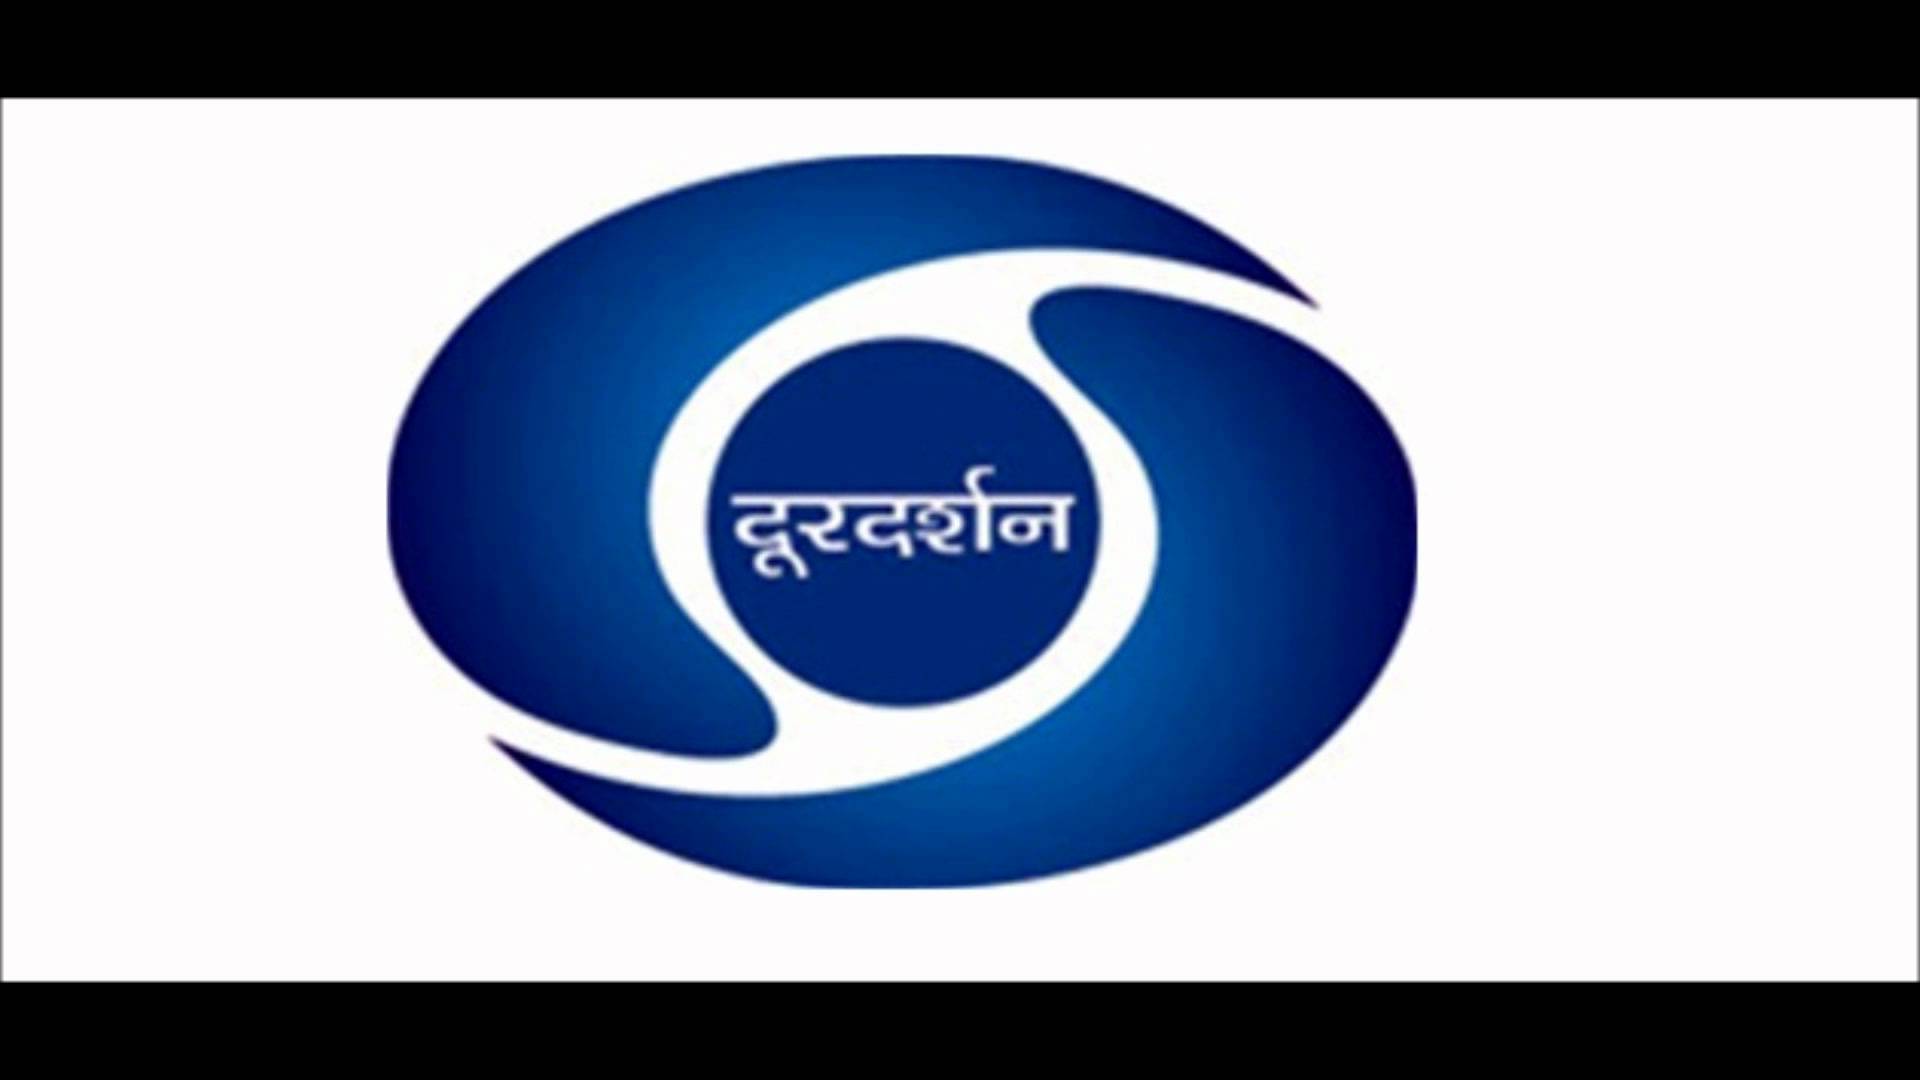 Three Doordarshan staff allege sexual harassment by superiors